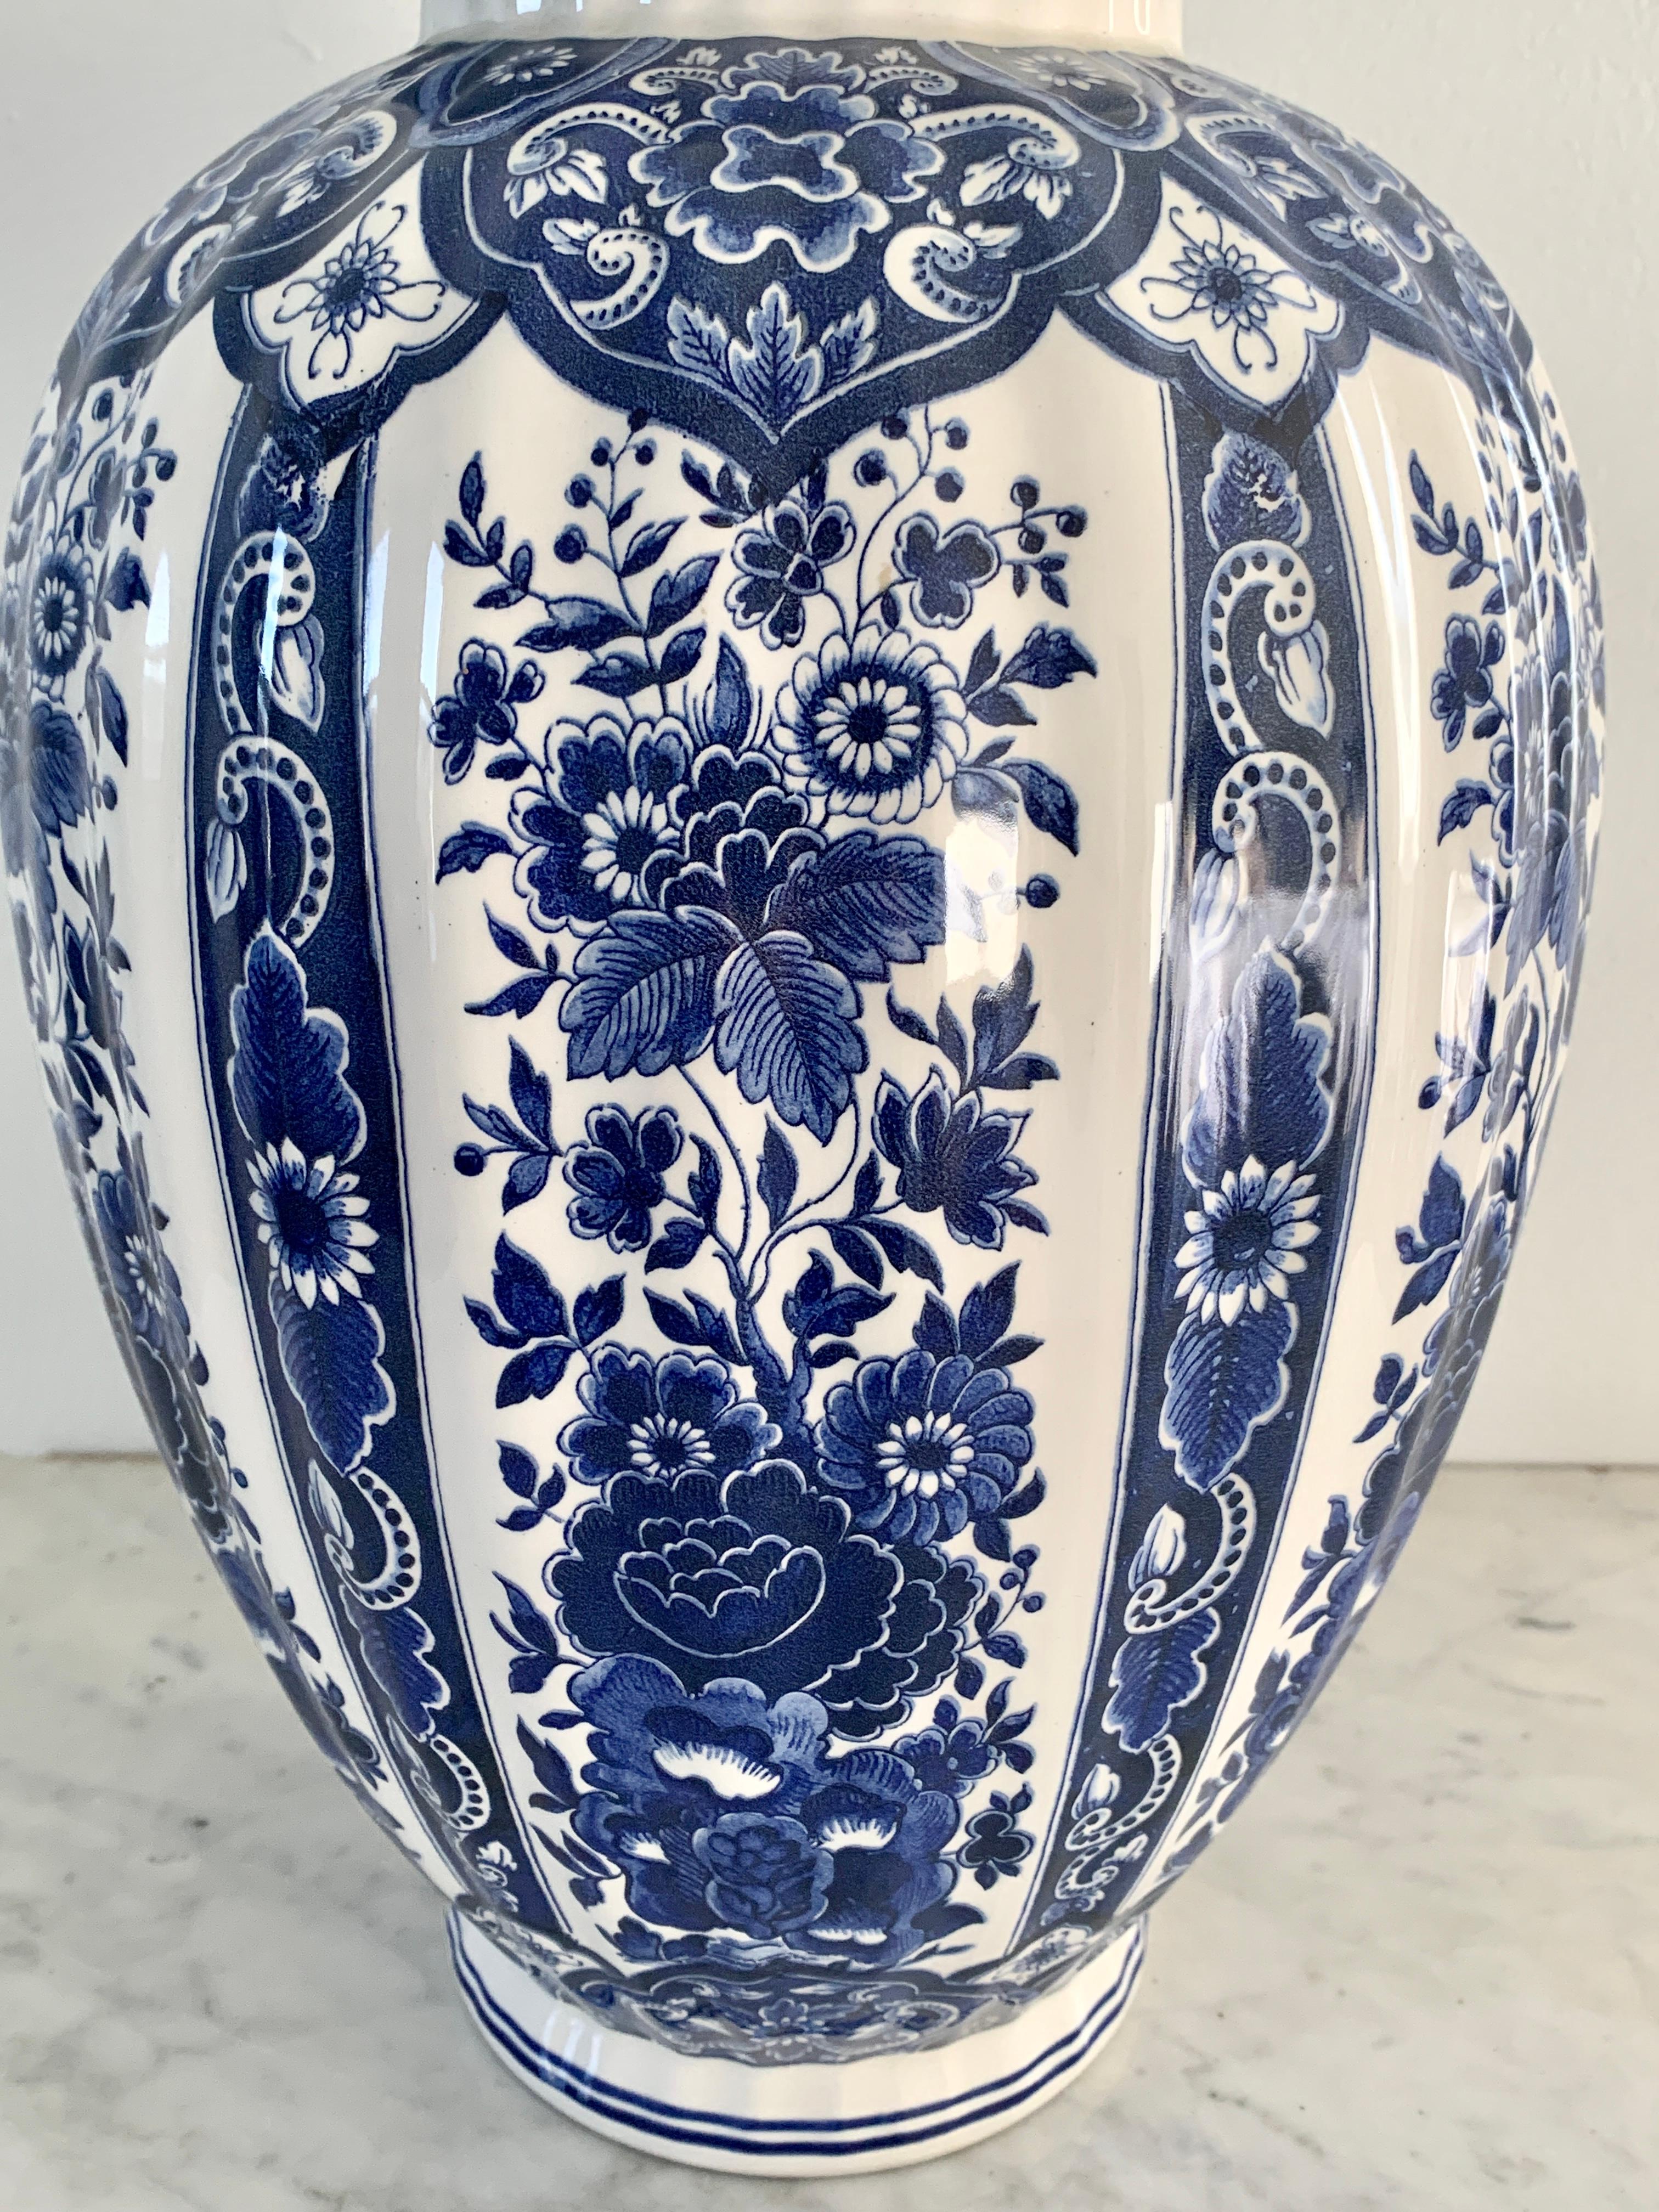 Chinoiserie Italian Blue and White Delfts Porcelain Ginger Jar by Ardalt Blue Delfia